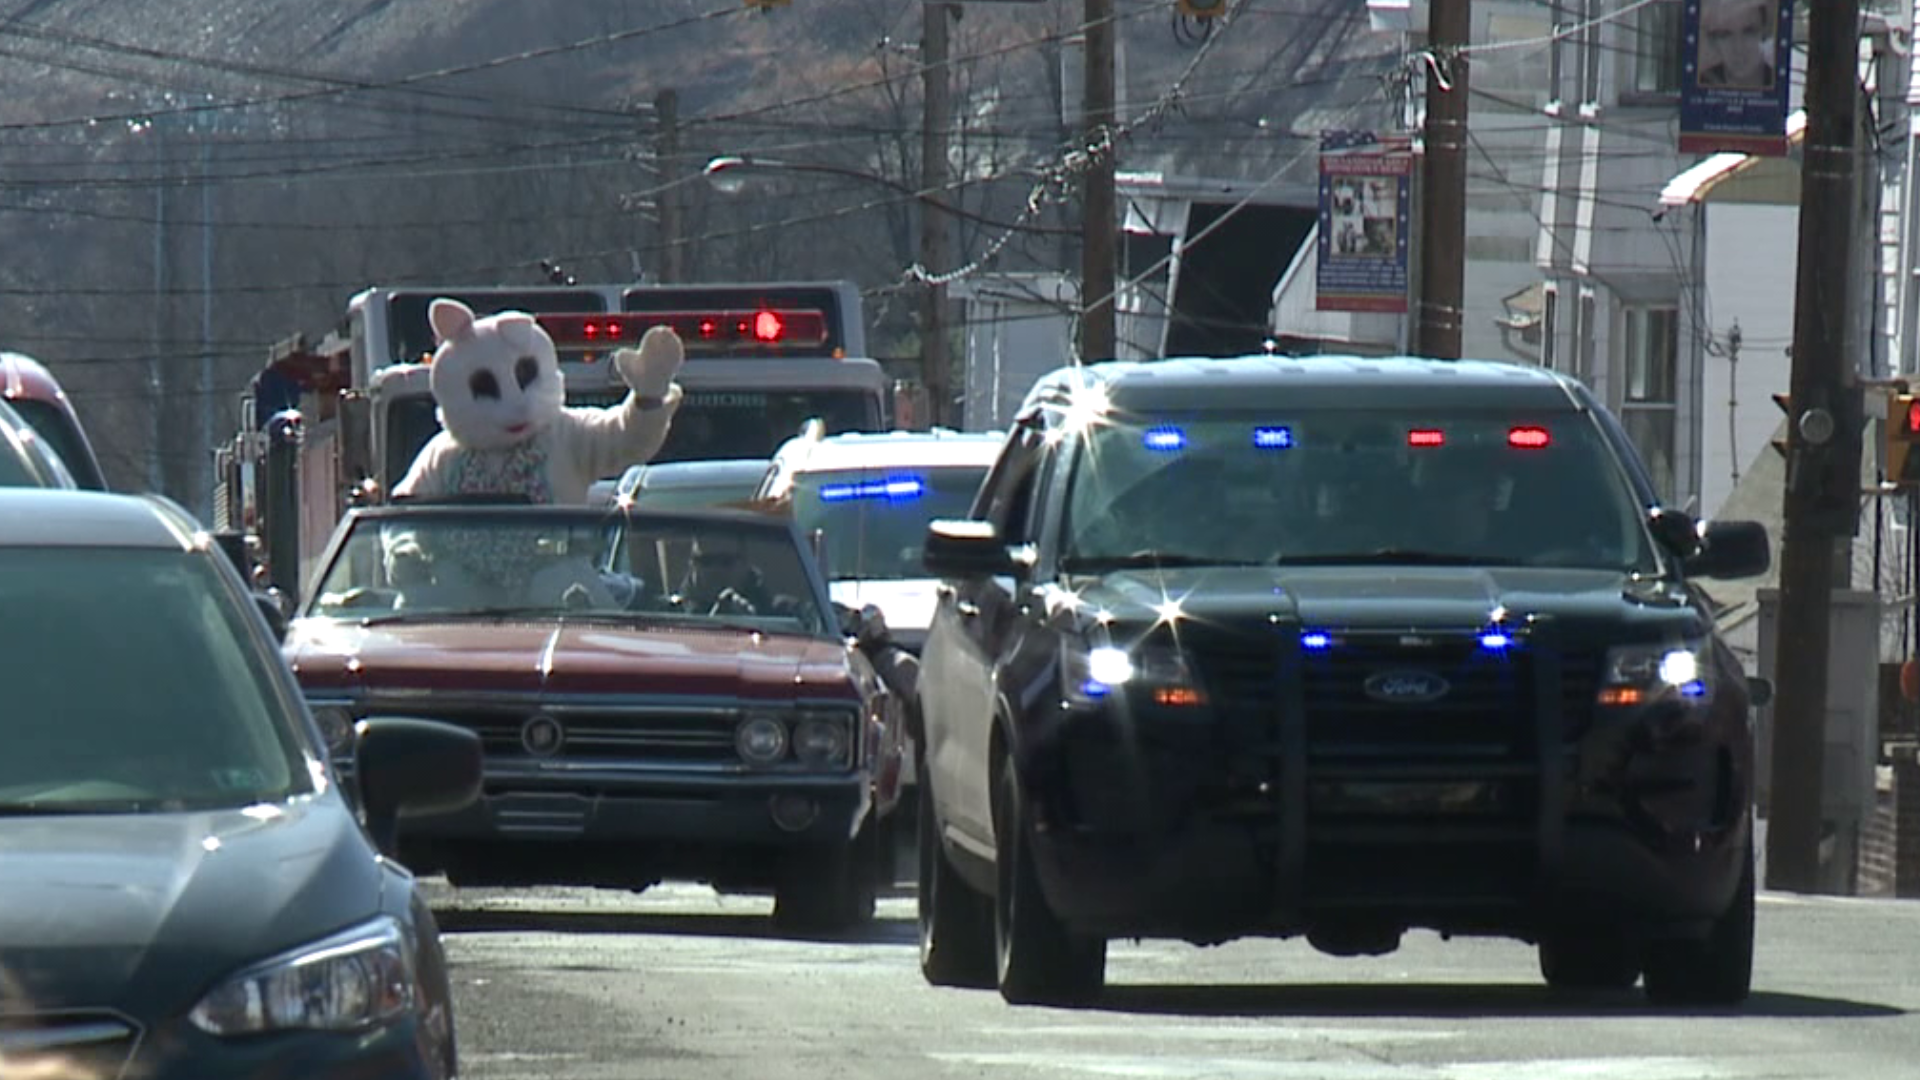 The bunny made several stops around the county on Friday.